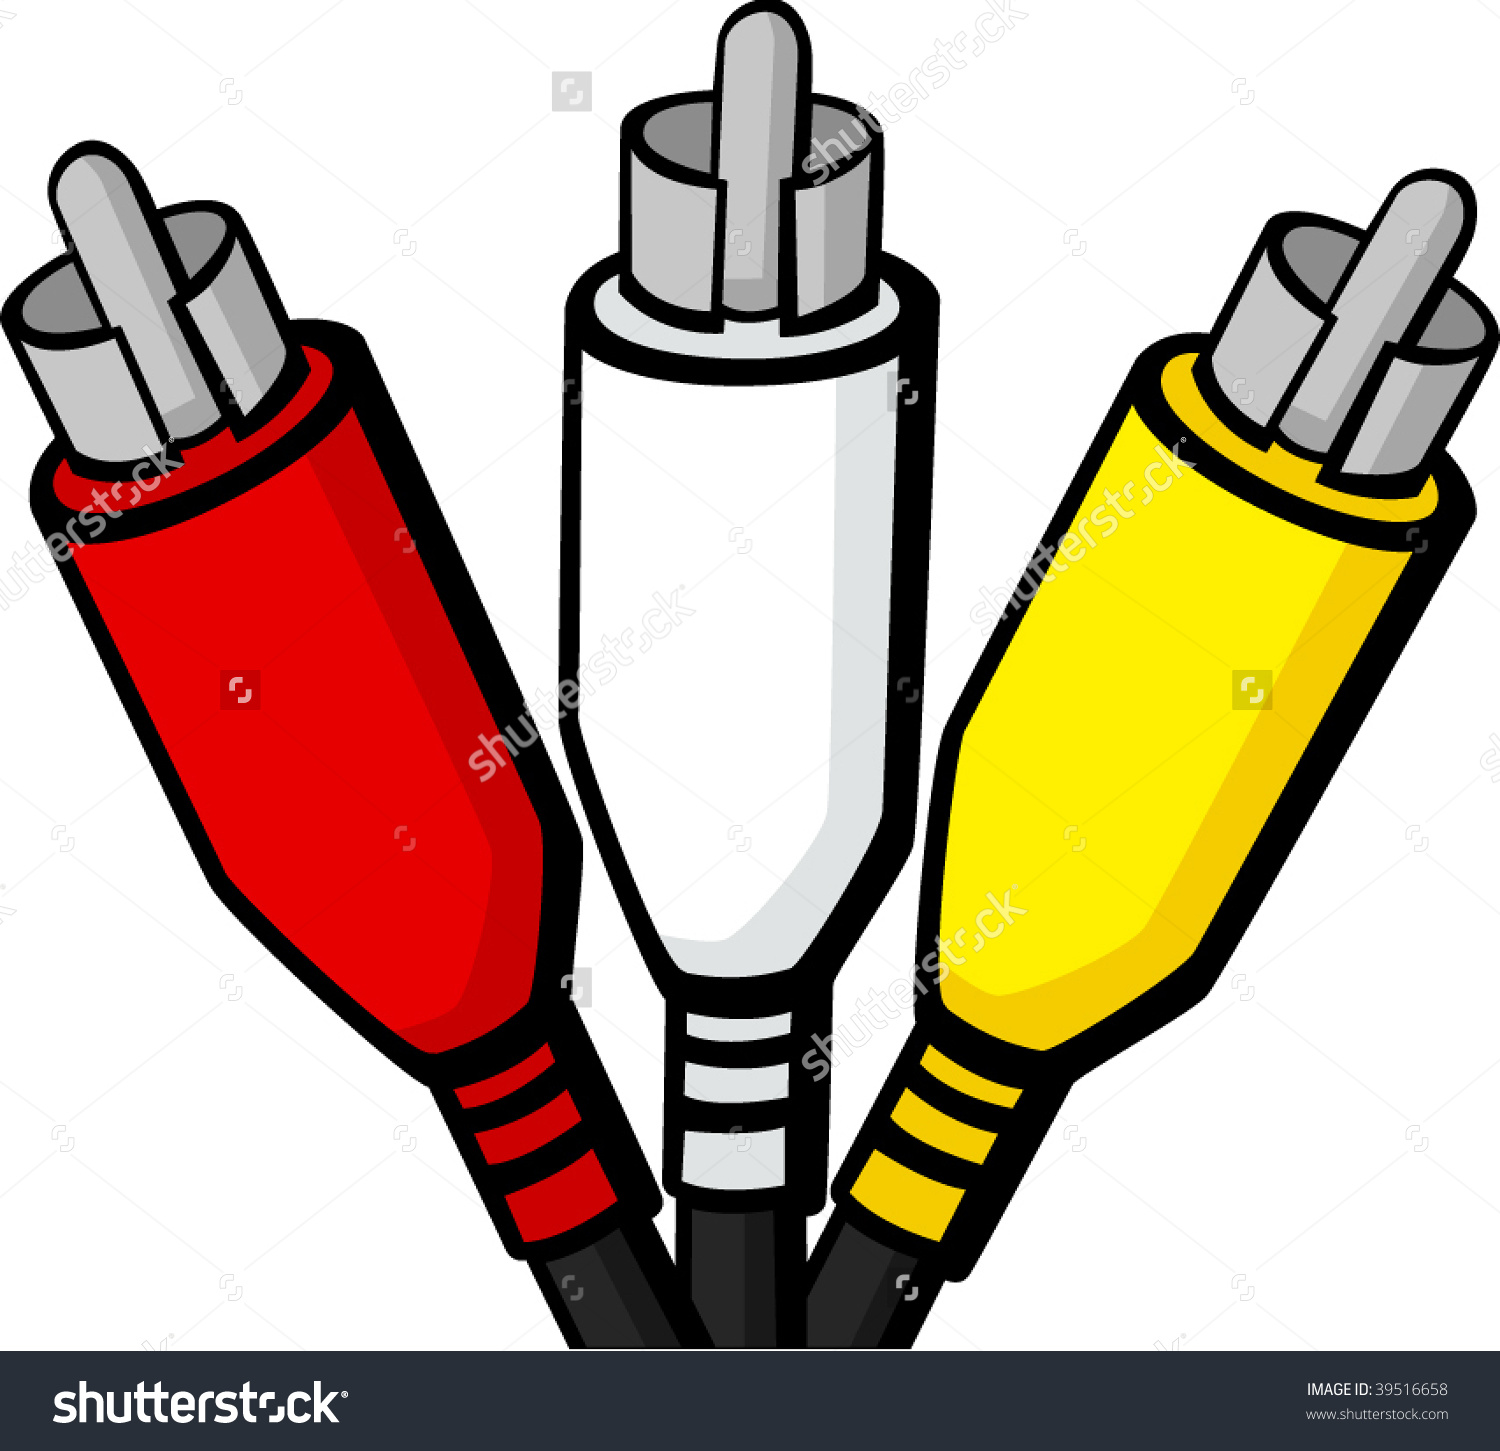 Rca Cables Stock Vector 39516658.